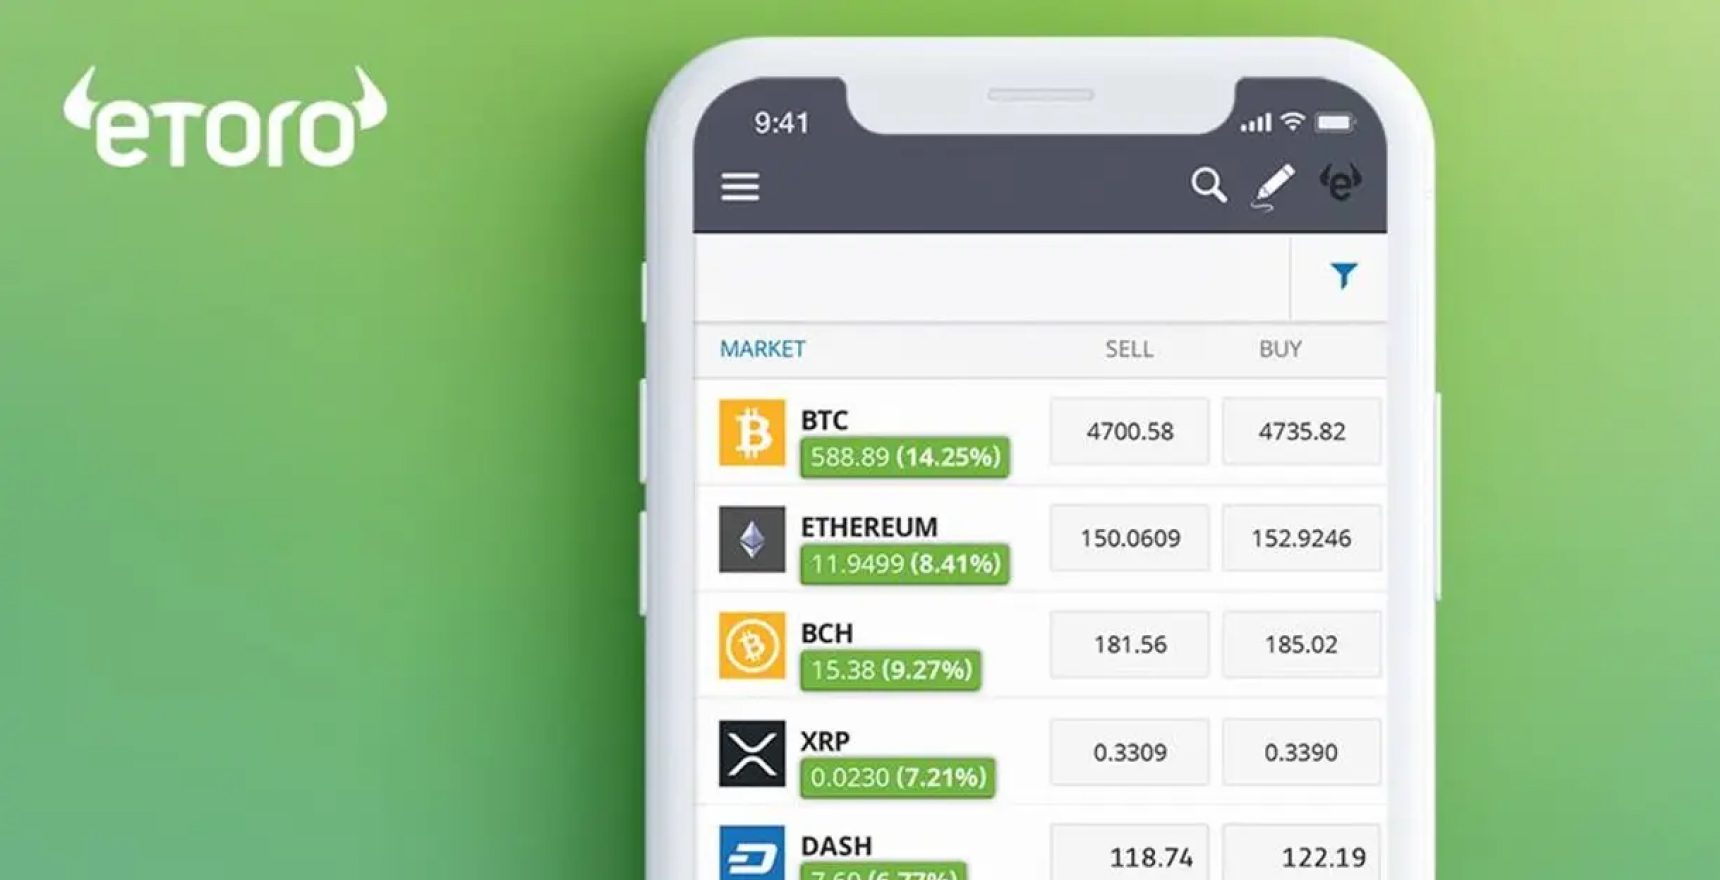 The Complete Guide to Buying Bitcoin on eToro